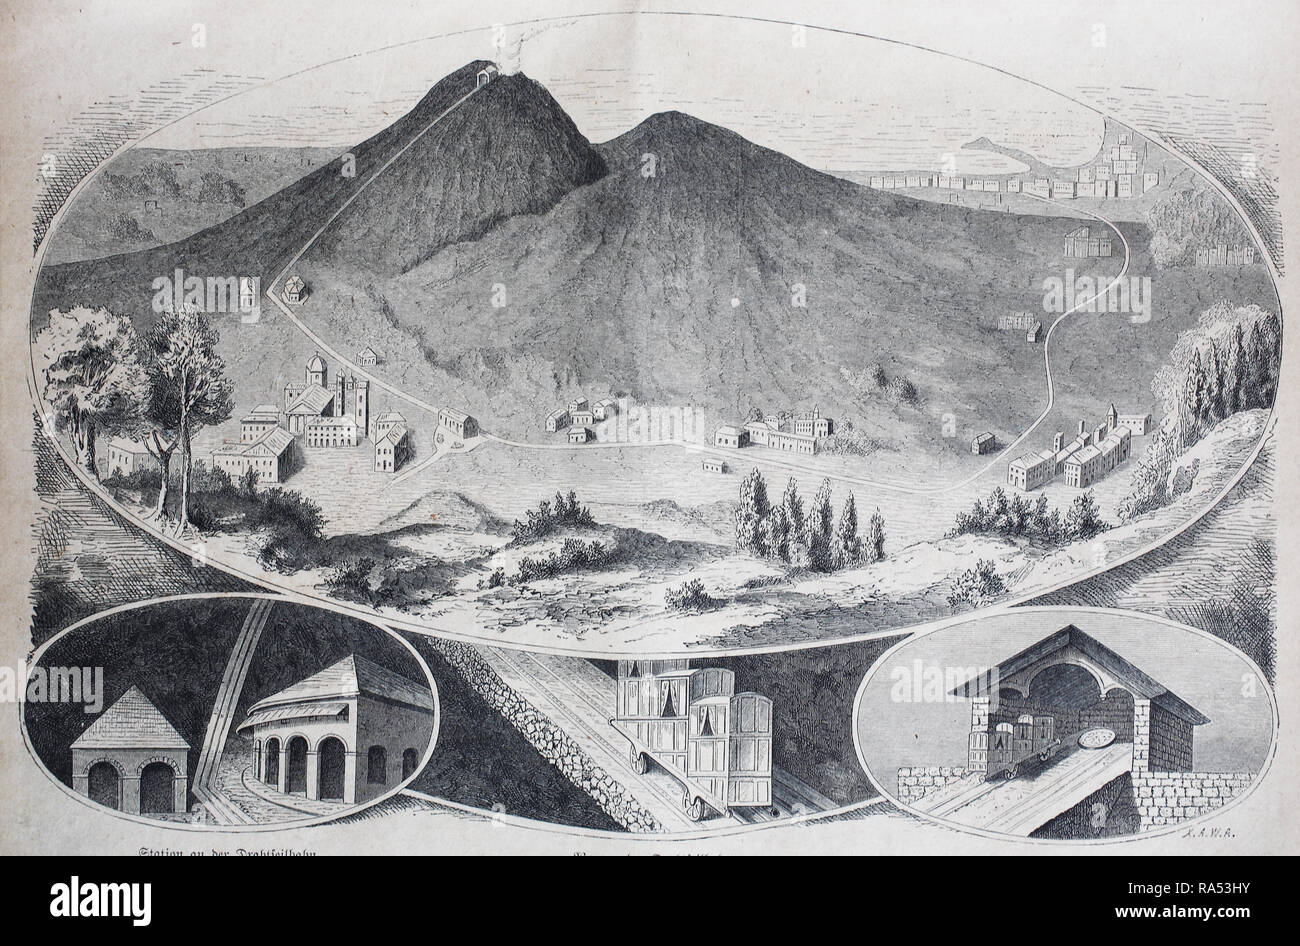 Digital improved reproduction, The railway on Mount Vesuvius, Italy, Die Eisenbahn auf dem Vesuv, Italien, from an original print from the year 1865, 19th century, Stock Photo